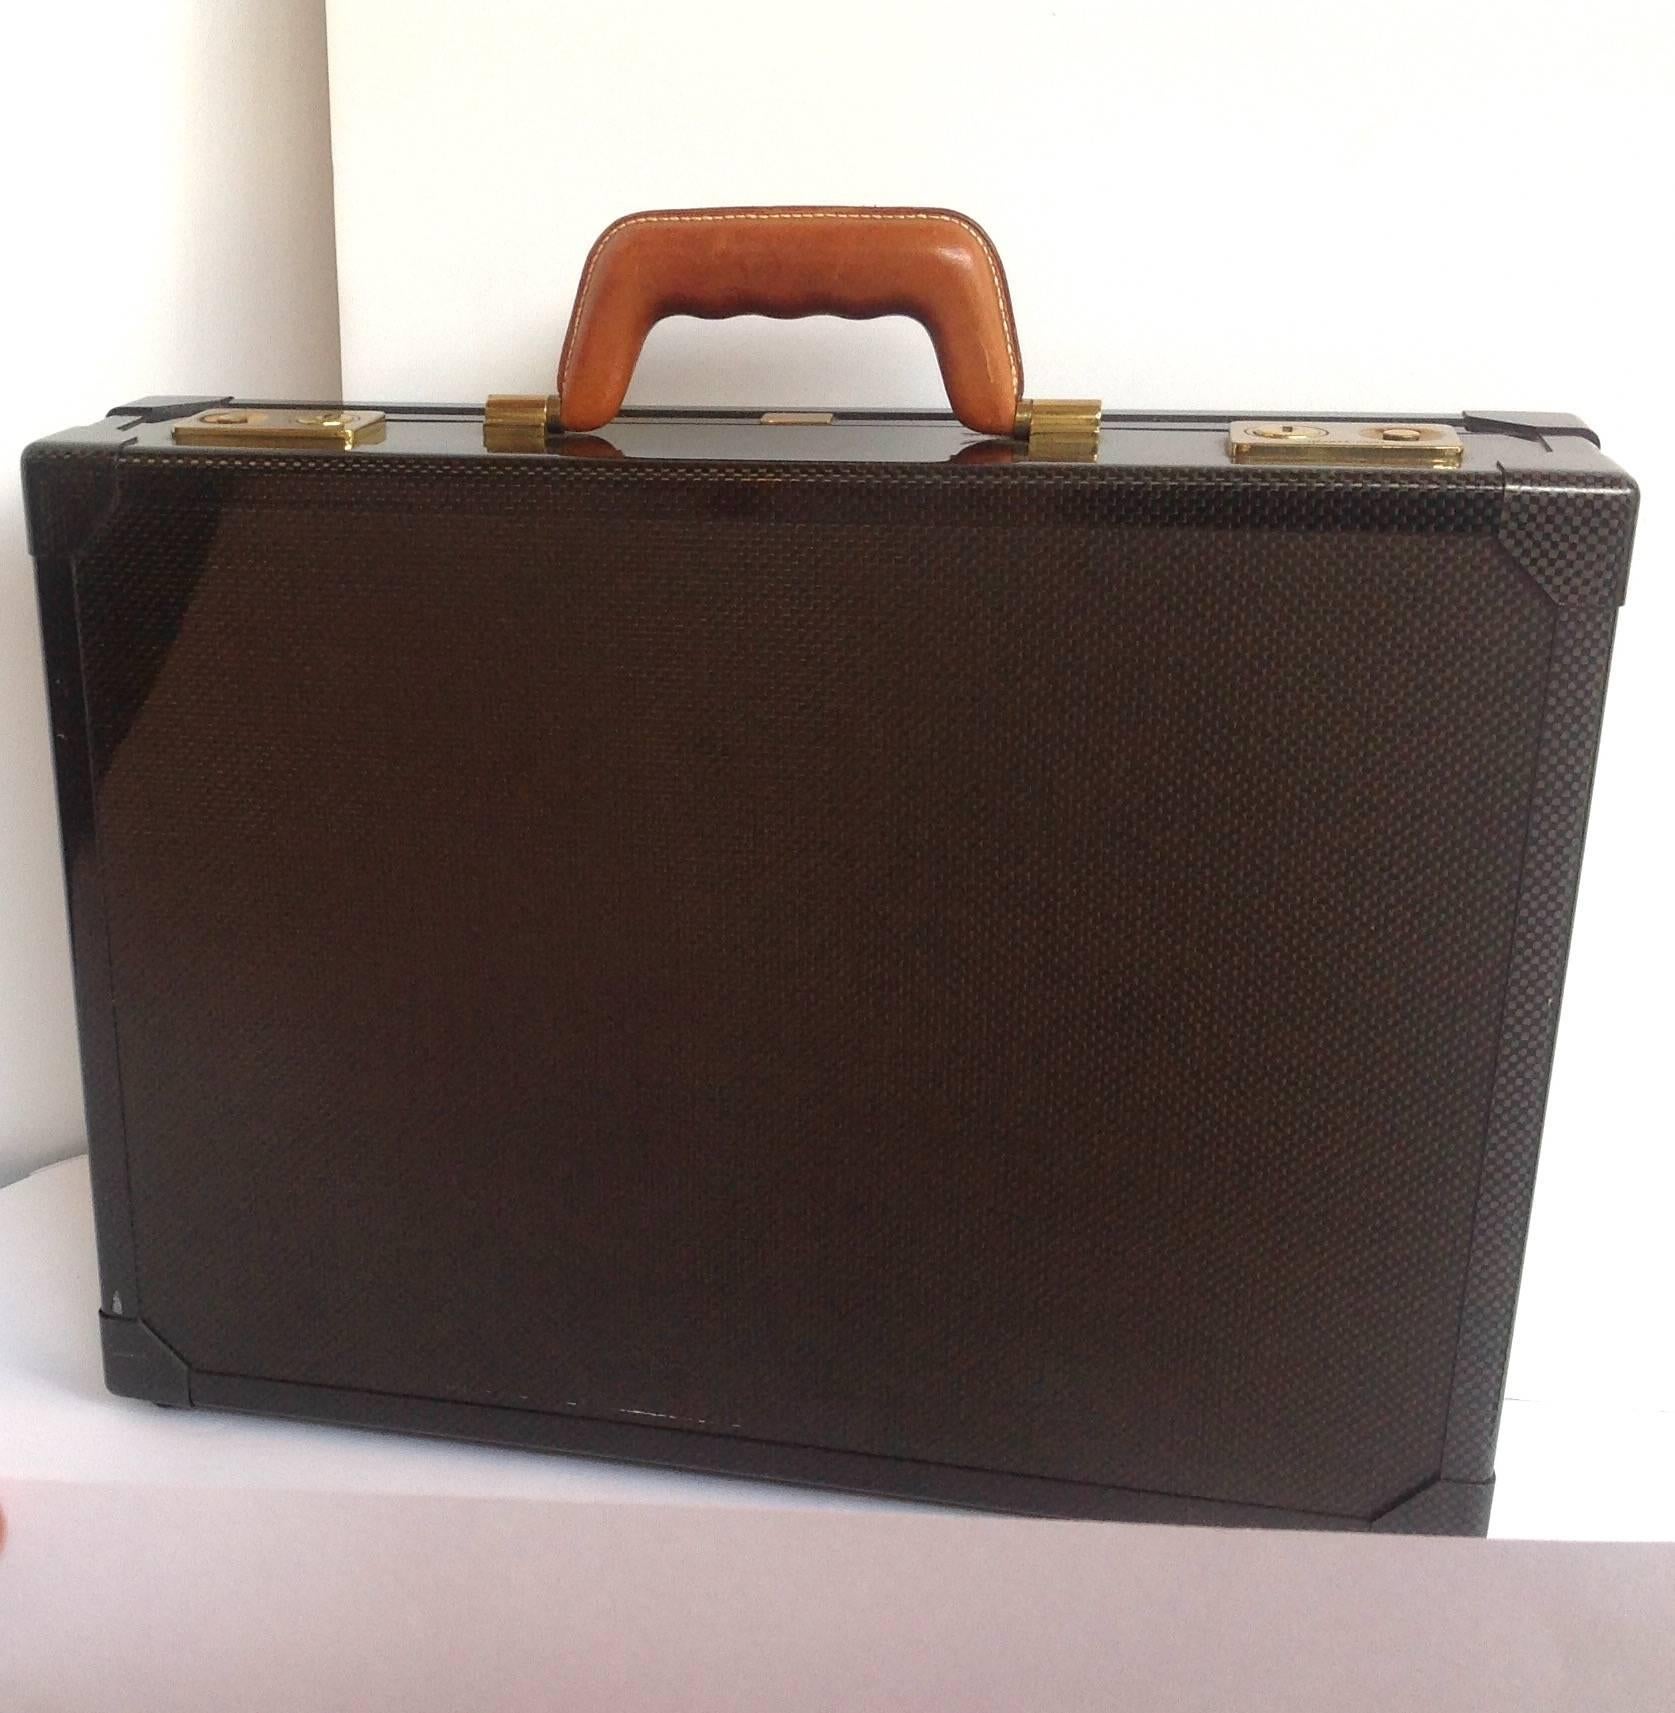 French Hermes Brief Case Graphite Limited Edition Attache For Sale